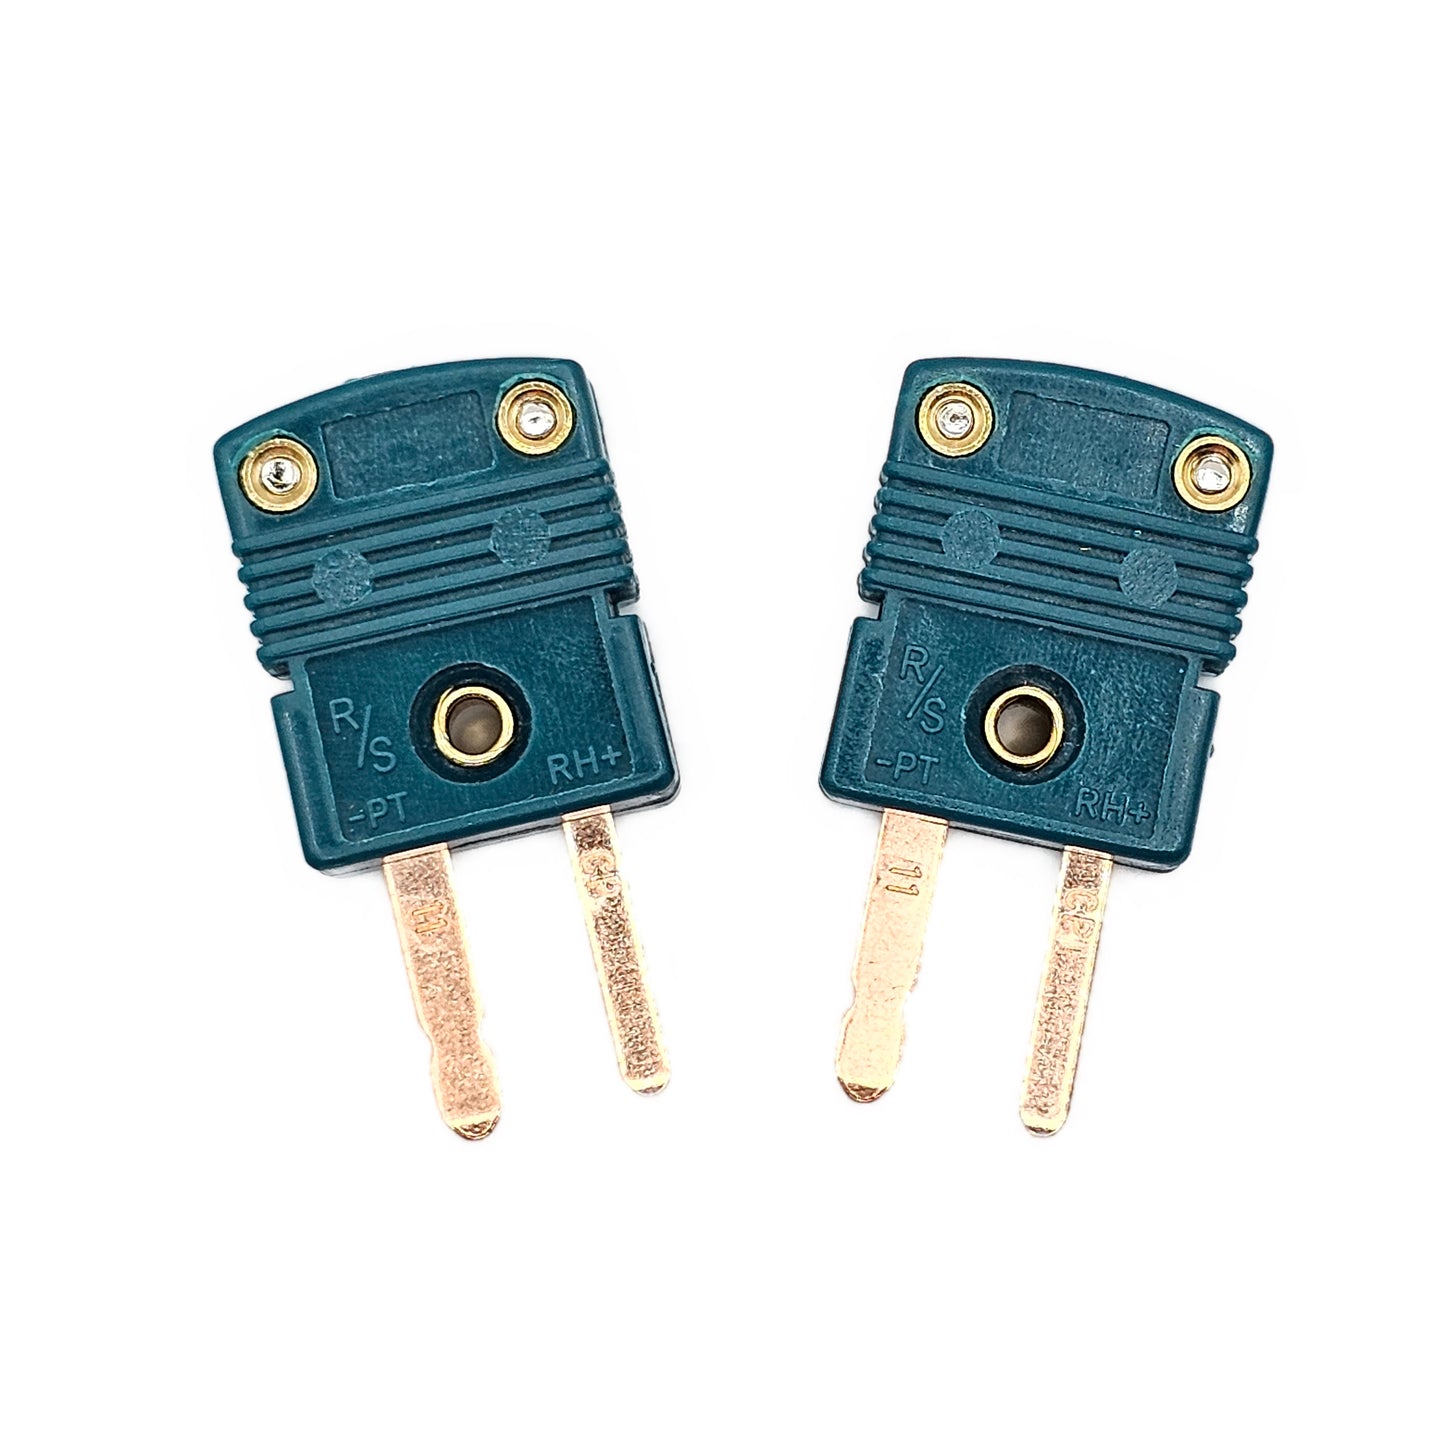 Type R/S Miniature Thermocouple Connectors, Omega Style - Male, 2-Pack